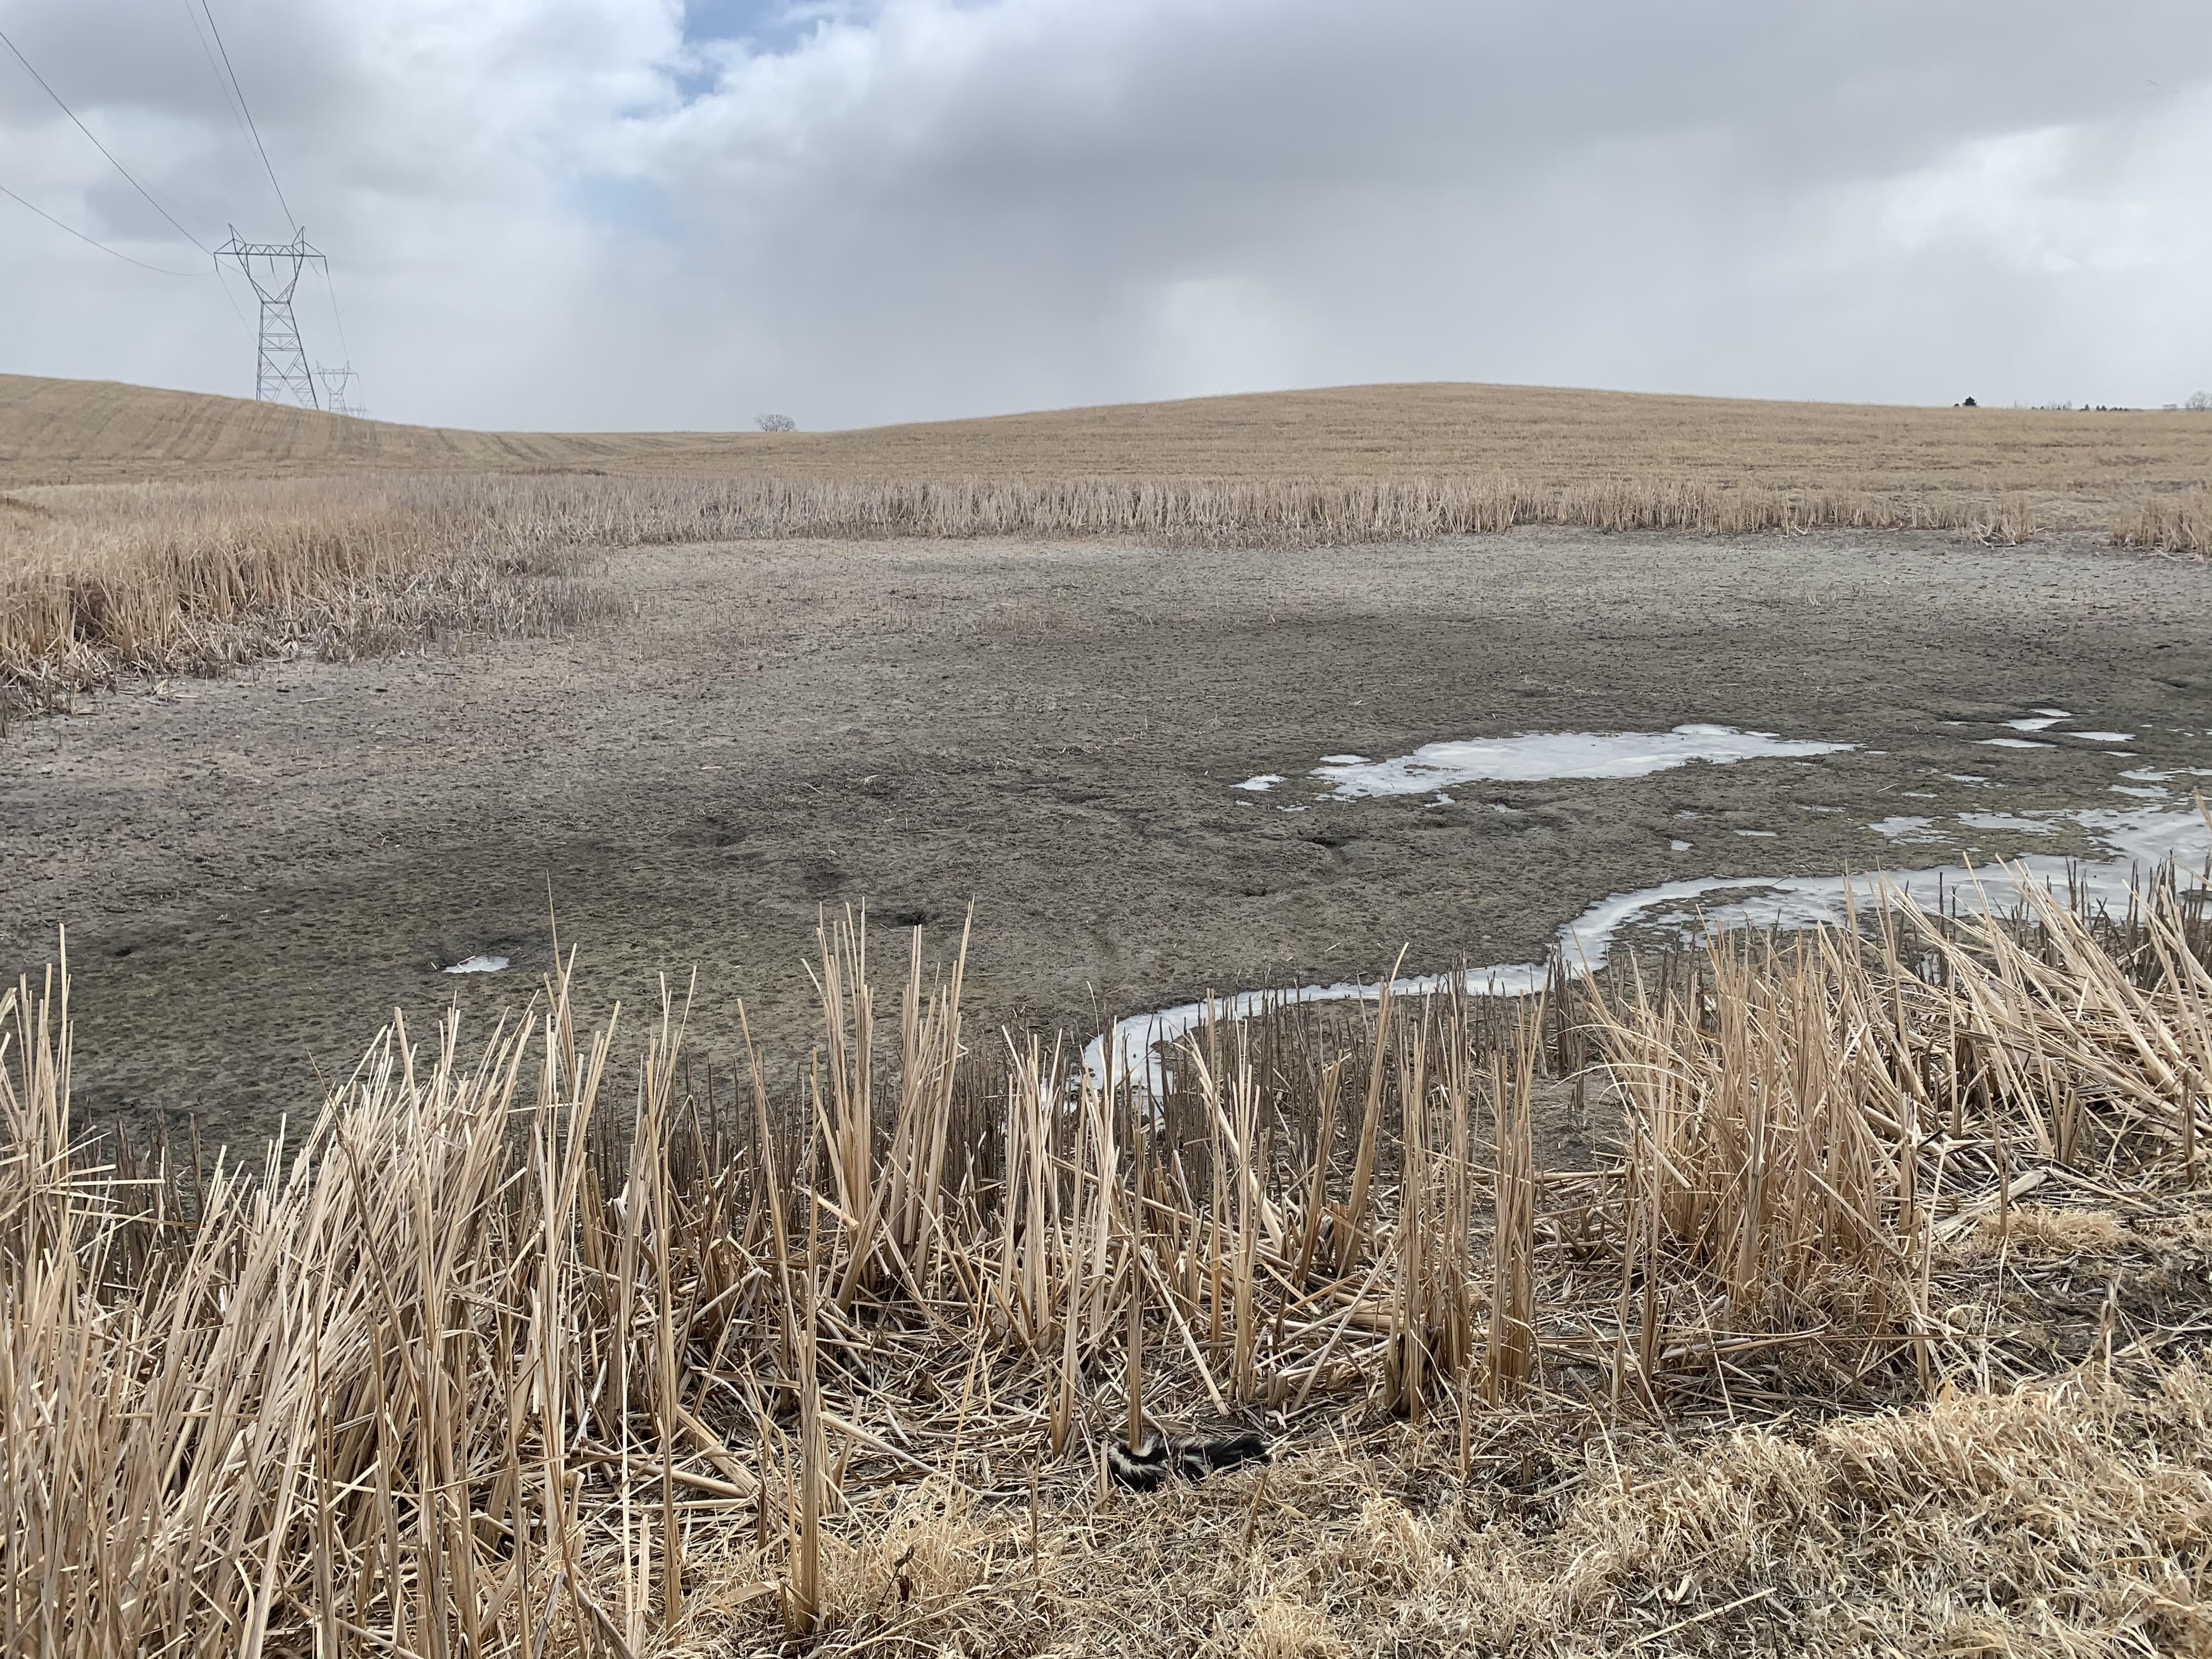 Farmers continue to prepare for a dry growing season as the drought status worsens North Dakota